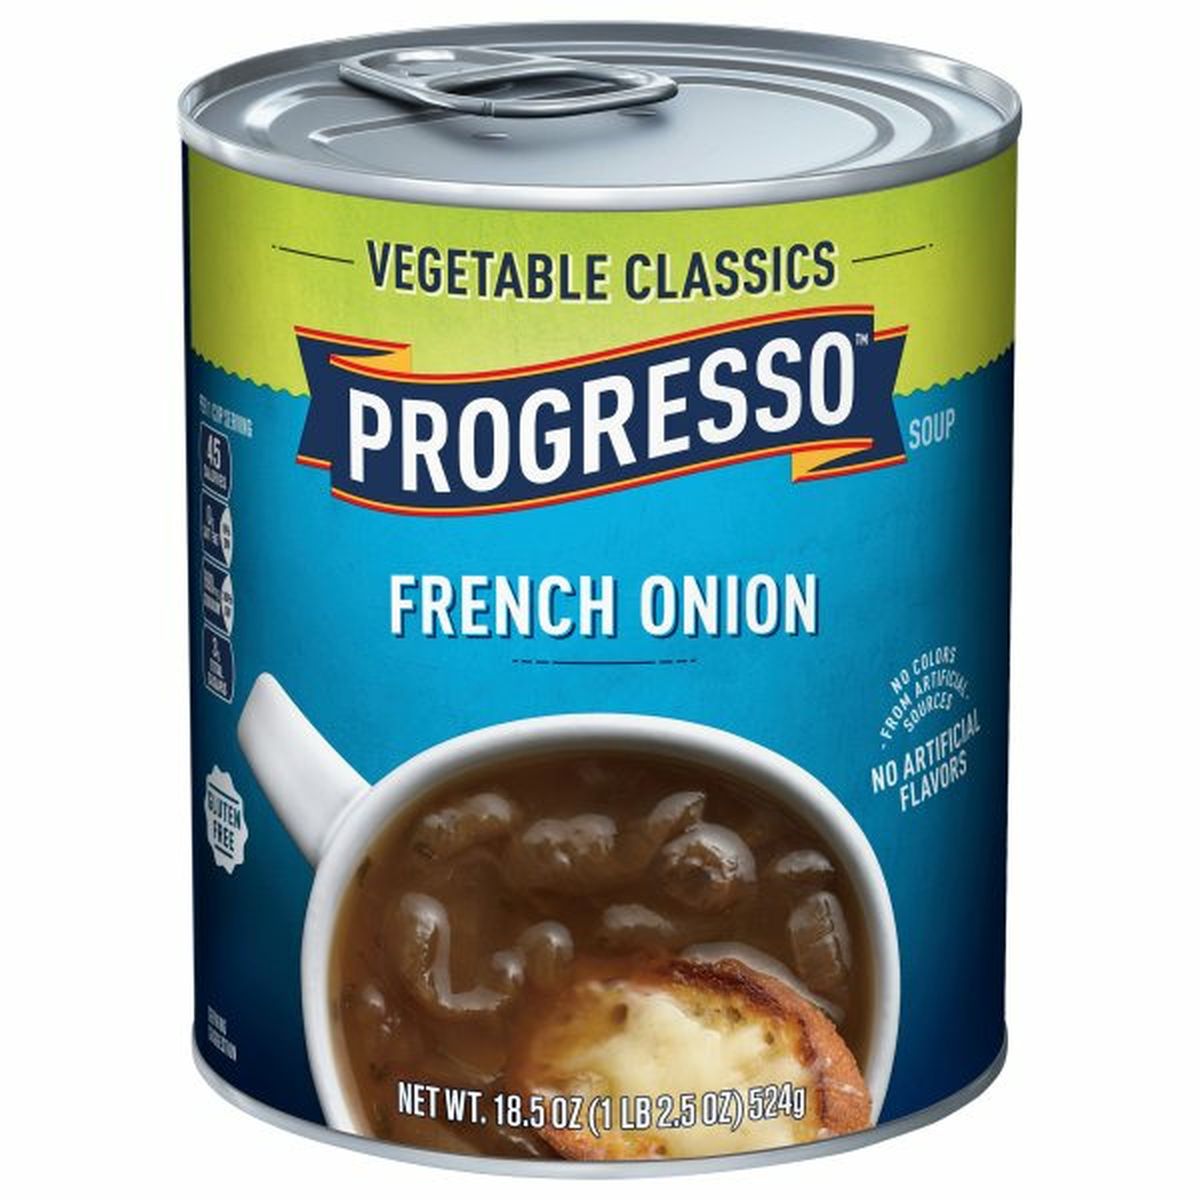 Calories in Progresso Soup, French Onion